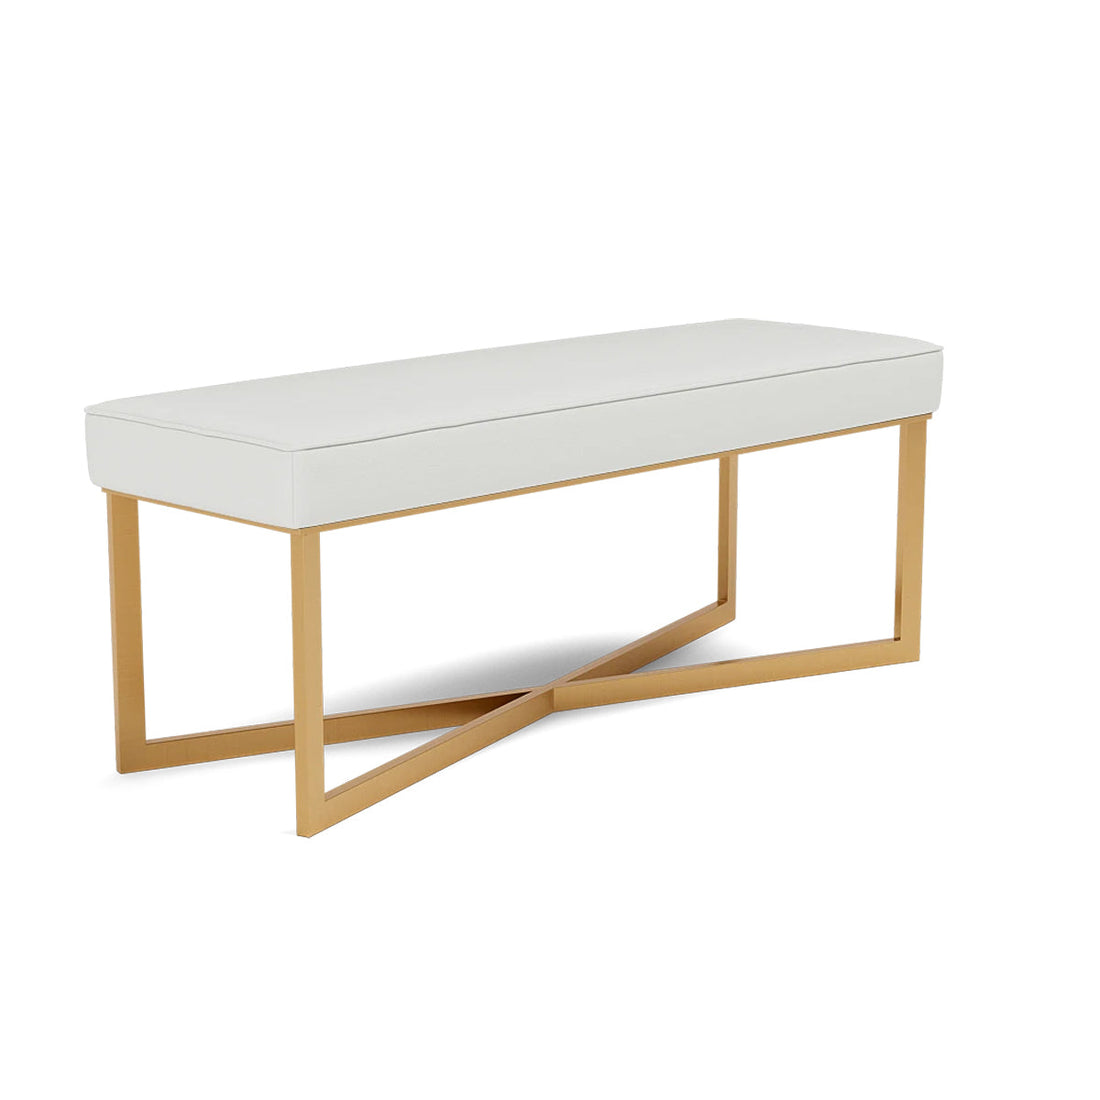 Made Goods Roger Double Bench in Garonne Marine Leather